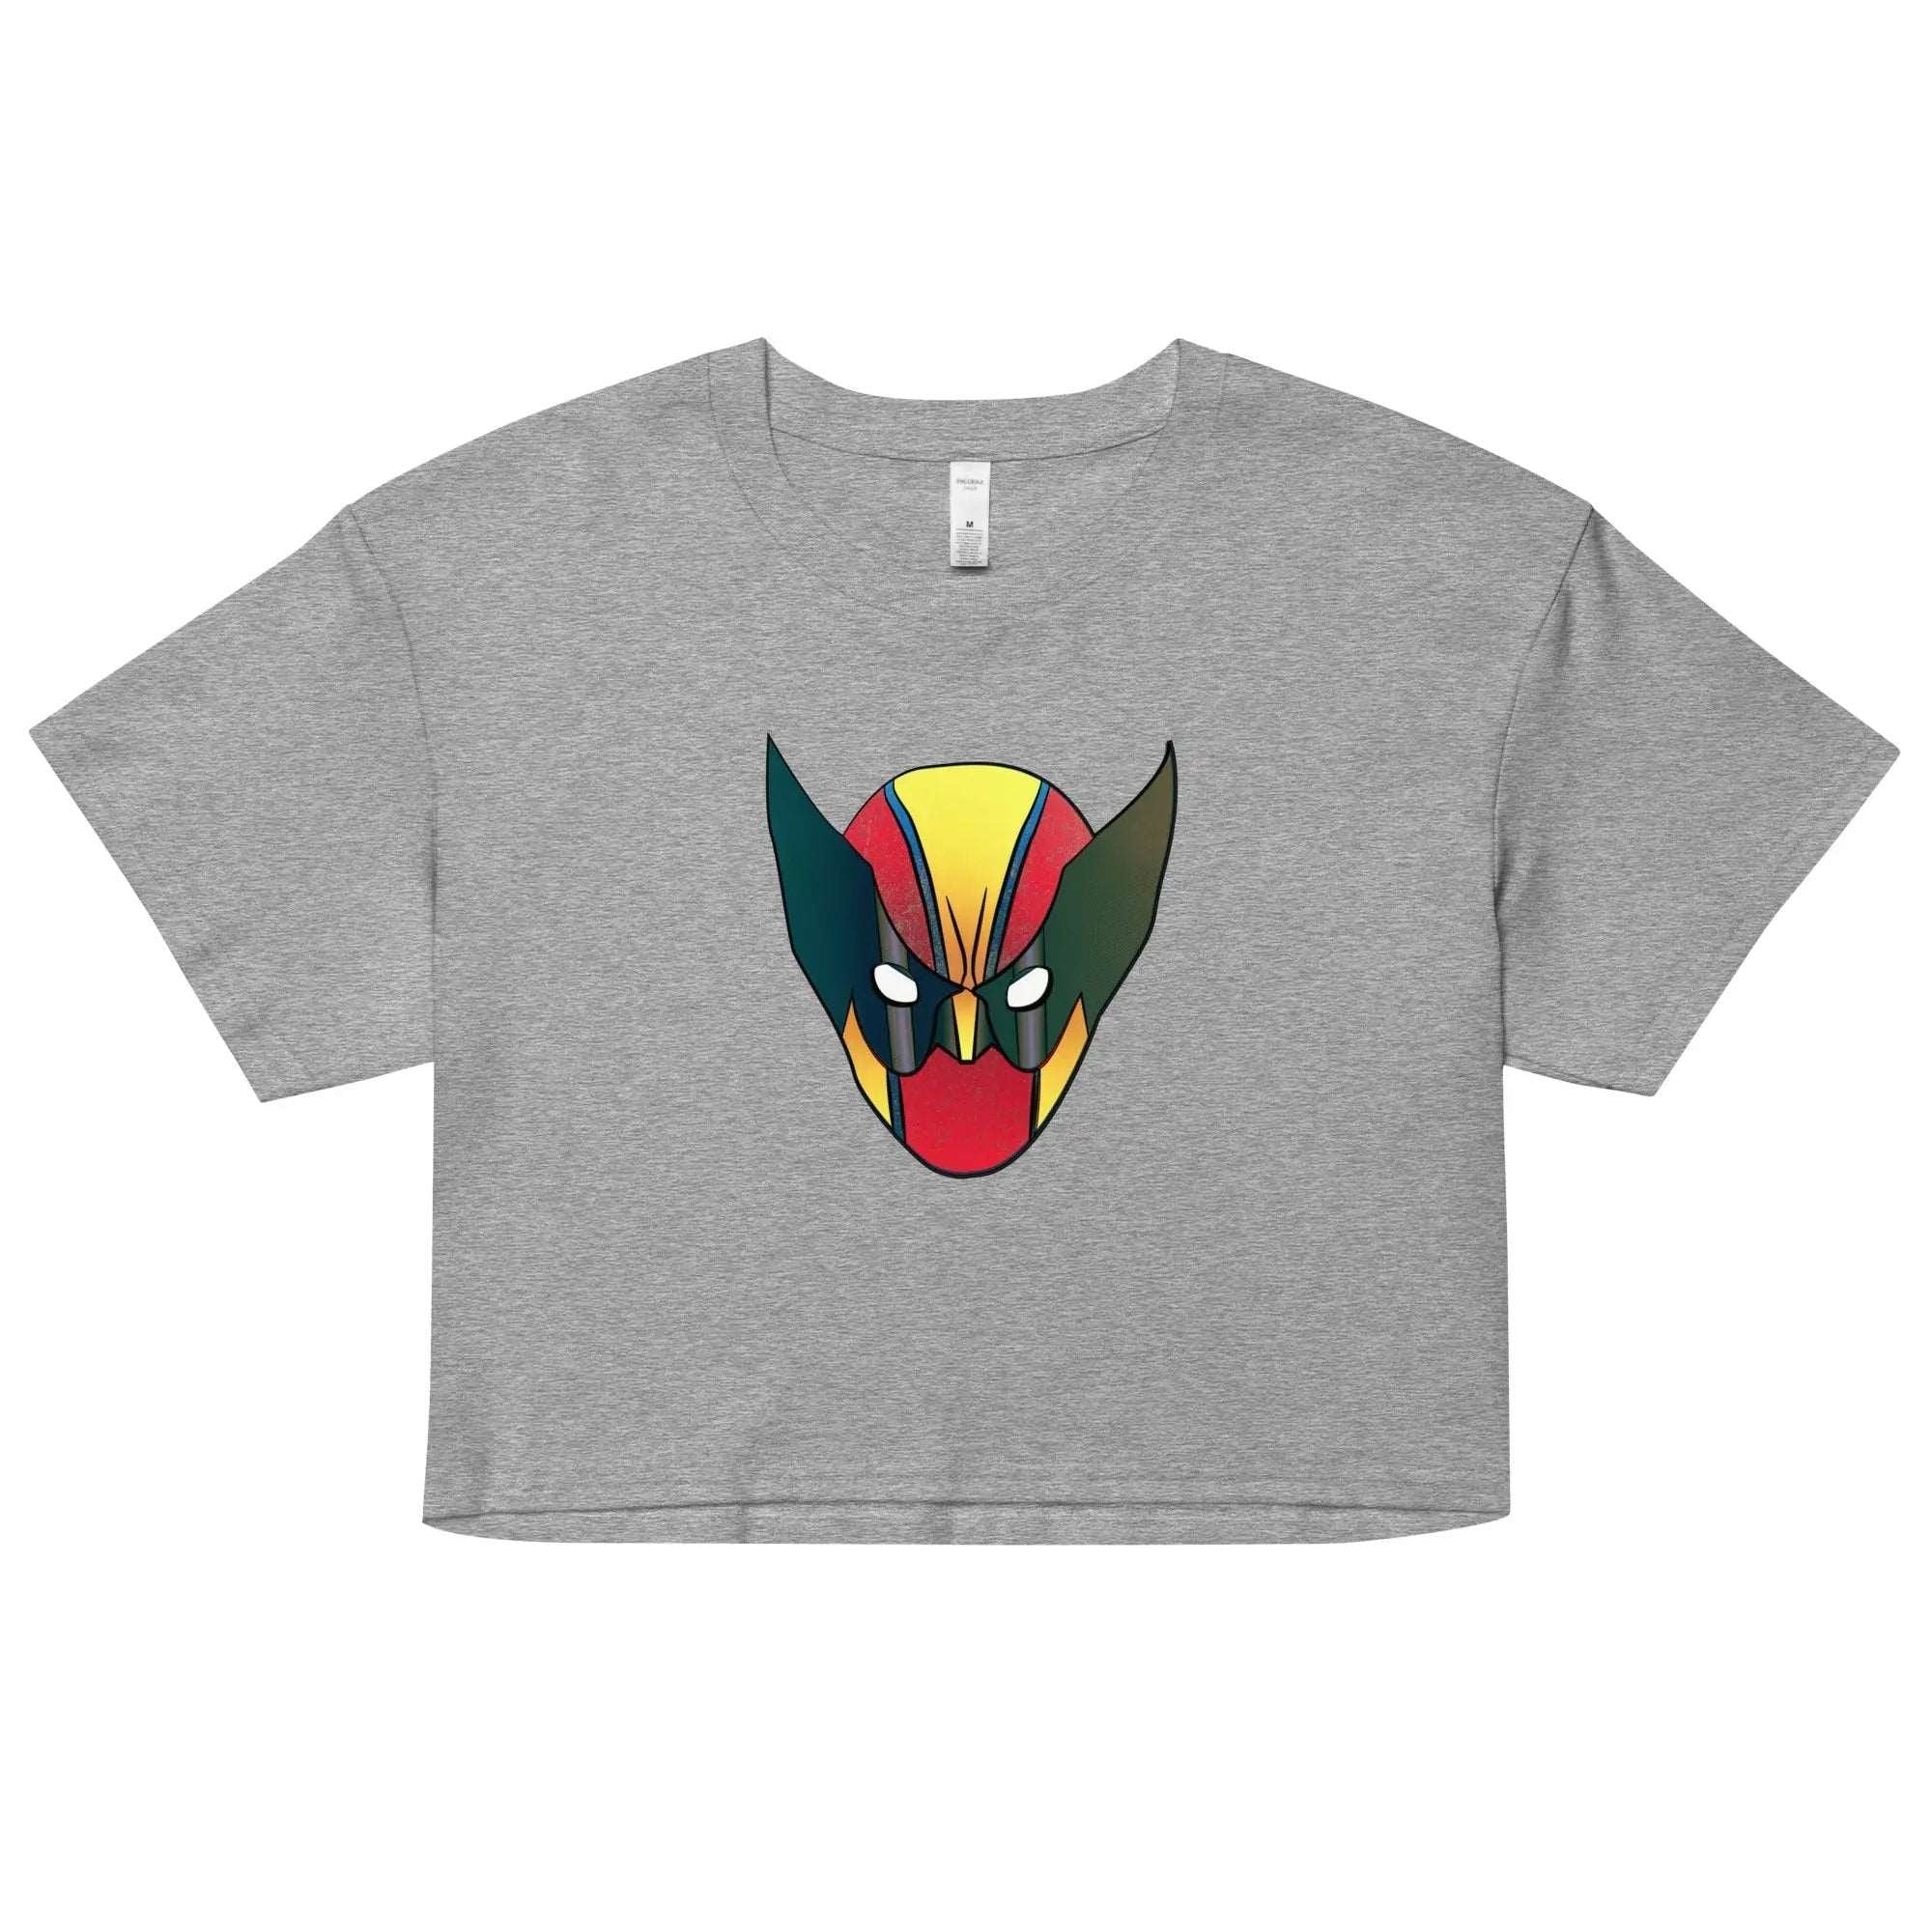 a grey crop top with a red, yellow, and green face